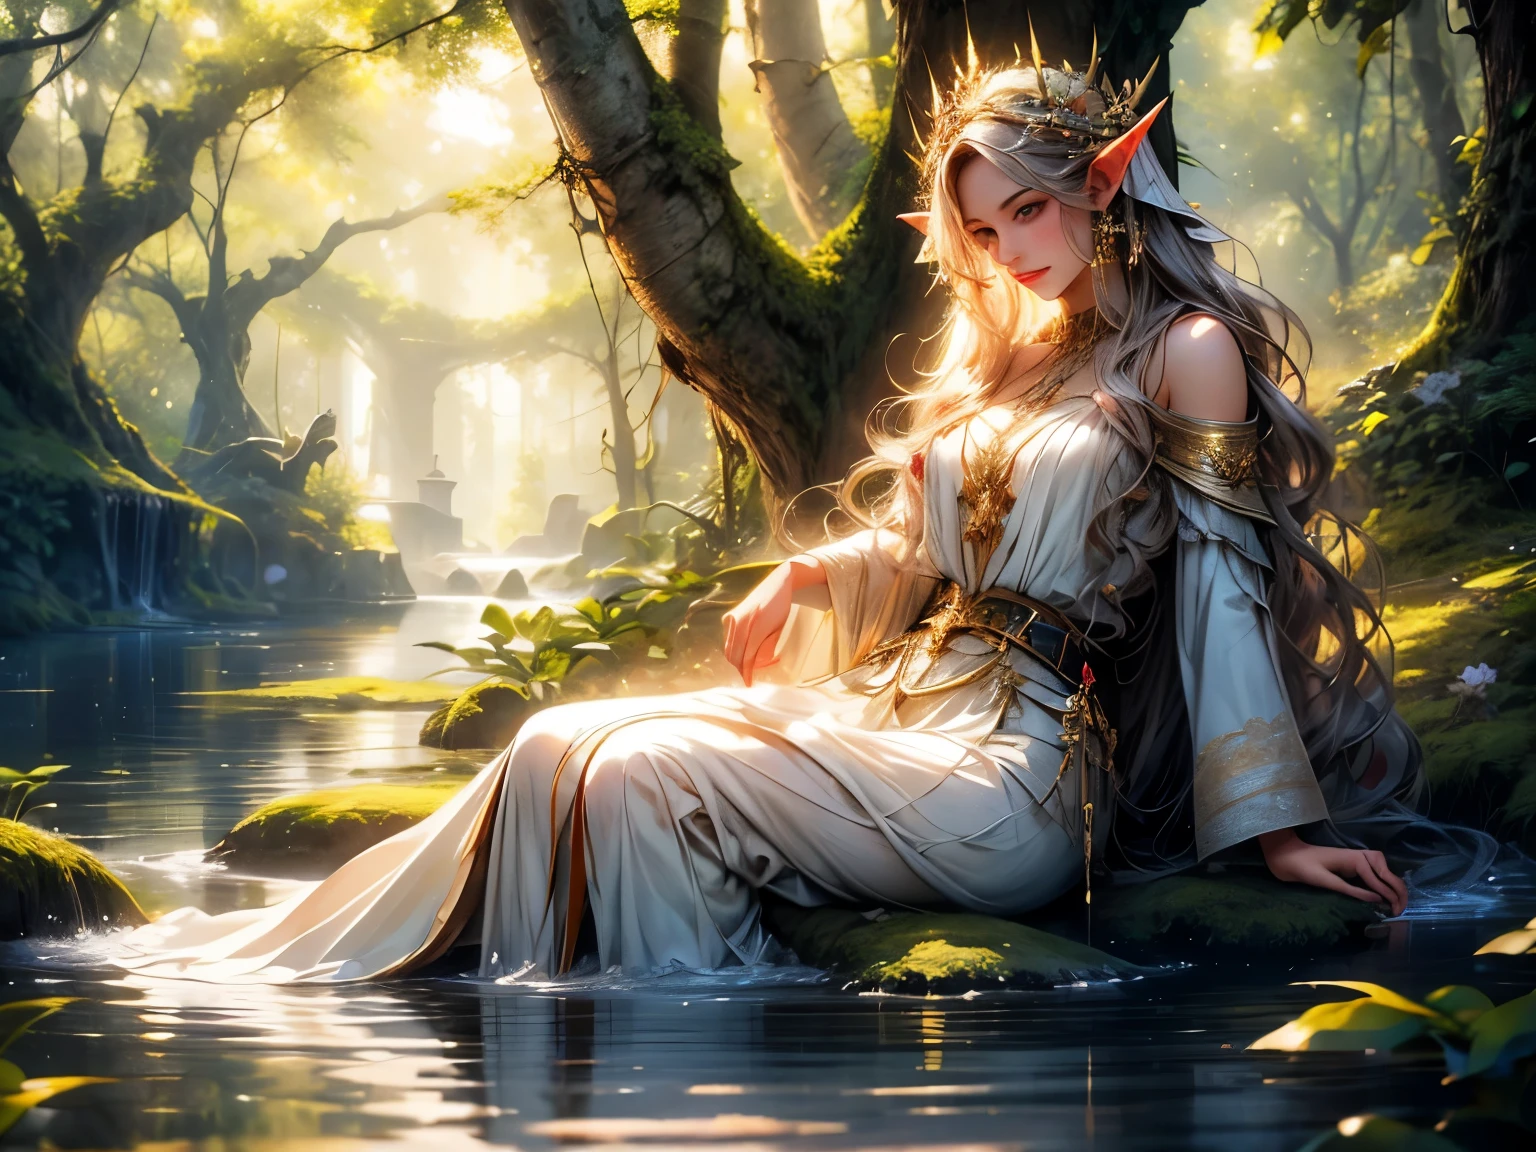 (best quality,4k,8k,highres,masterpiece:1.2),ultra-detailed,(realistic,photorealistic,photo-realistic:1.37),portrait,elf sitting by the lake,fairy-like creature,majestic,serene expression,long,flowing hair,pointed ears,sharp facial features,piercing eyes,ethereal glow,elven crown,delicate and intricate details,magical atmosphere,soft sunlight filtering through the trees,subtle reflections on the lake's surface,crystal-clear water,jewel-toned flowers blooming around the elf,tranquil surroundings,nature's beauty,peaceful and tranquil ambiance,fantastical scenery,sublime peace and harmony.